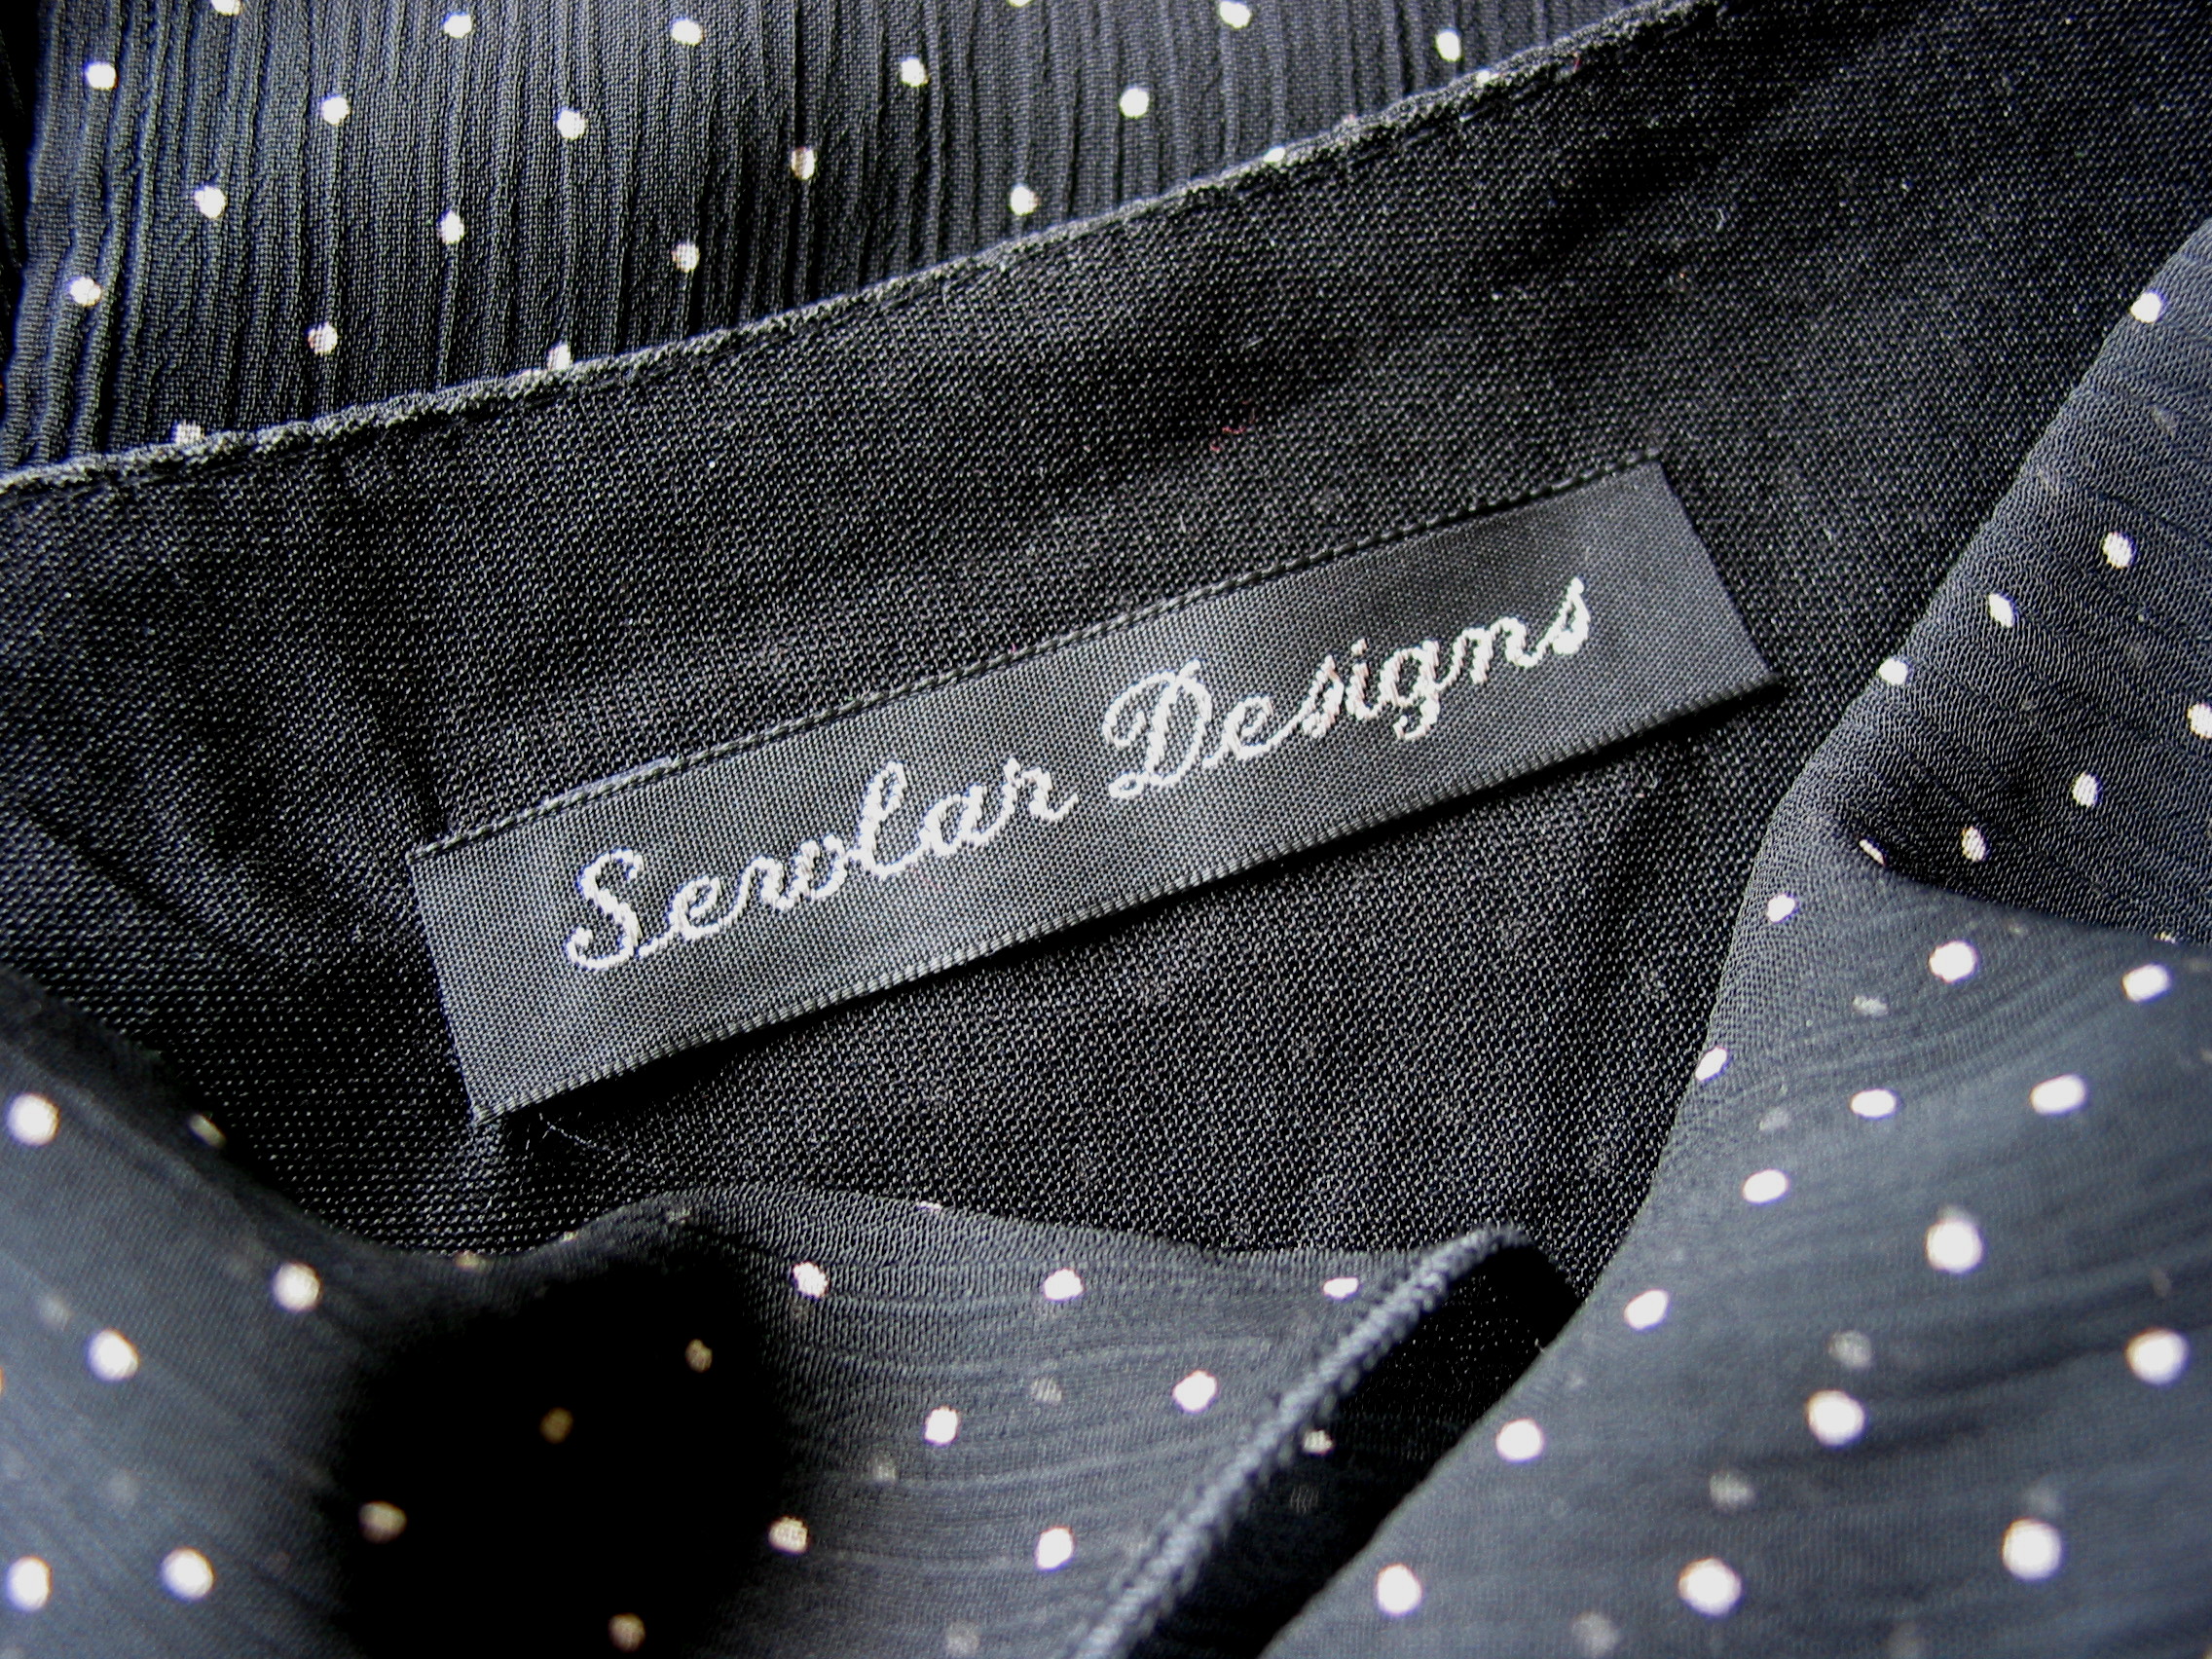 Iron On Fabric Labels | Iron On Woven Clothing Labels | itsminelabels.com